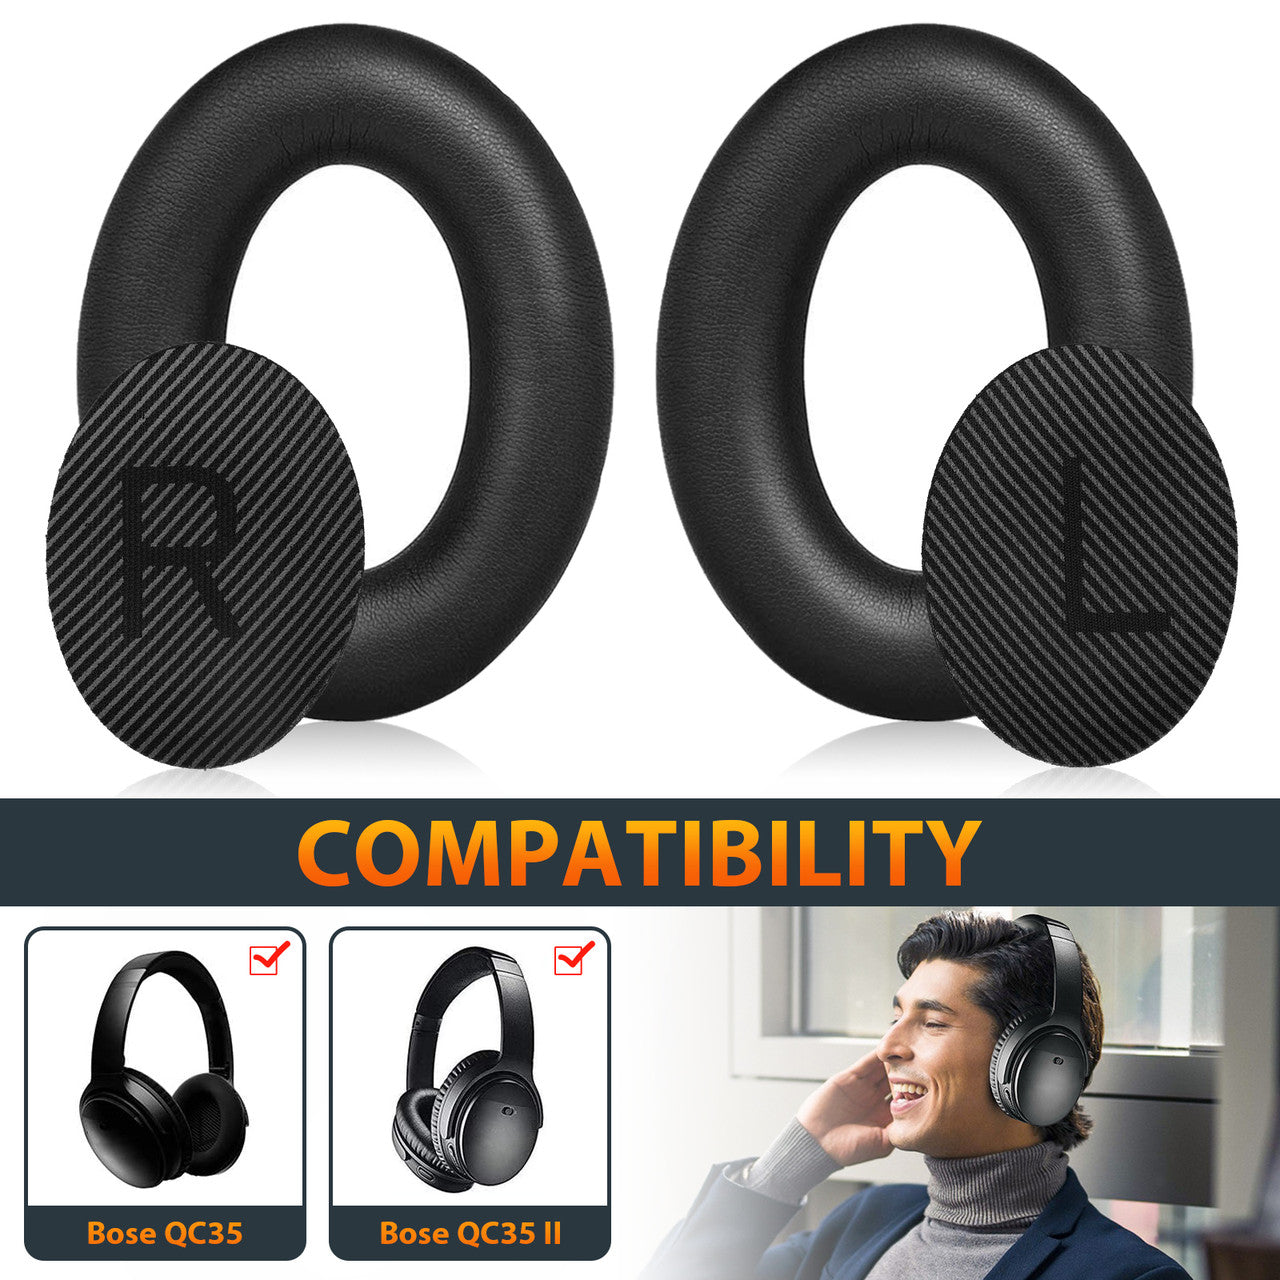 Replacement Ear Pads for Boses Headphones, 2Pcs Noise Isolation Memory Foam Ear Cushions Cover Compatible with QuietComfort 35 (Boses QC35) and Quiet Comfort 35 II (Boses QC35 II) Over-Ear Headphones